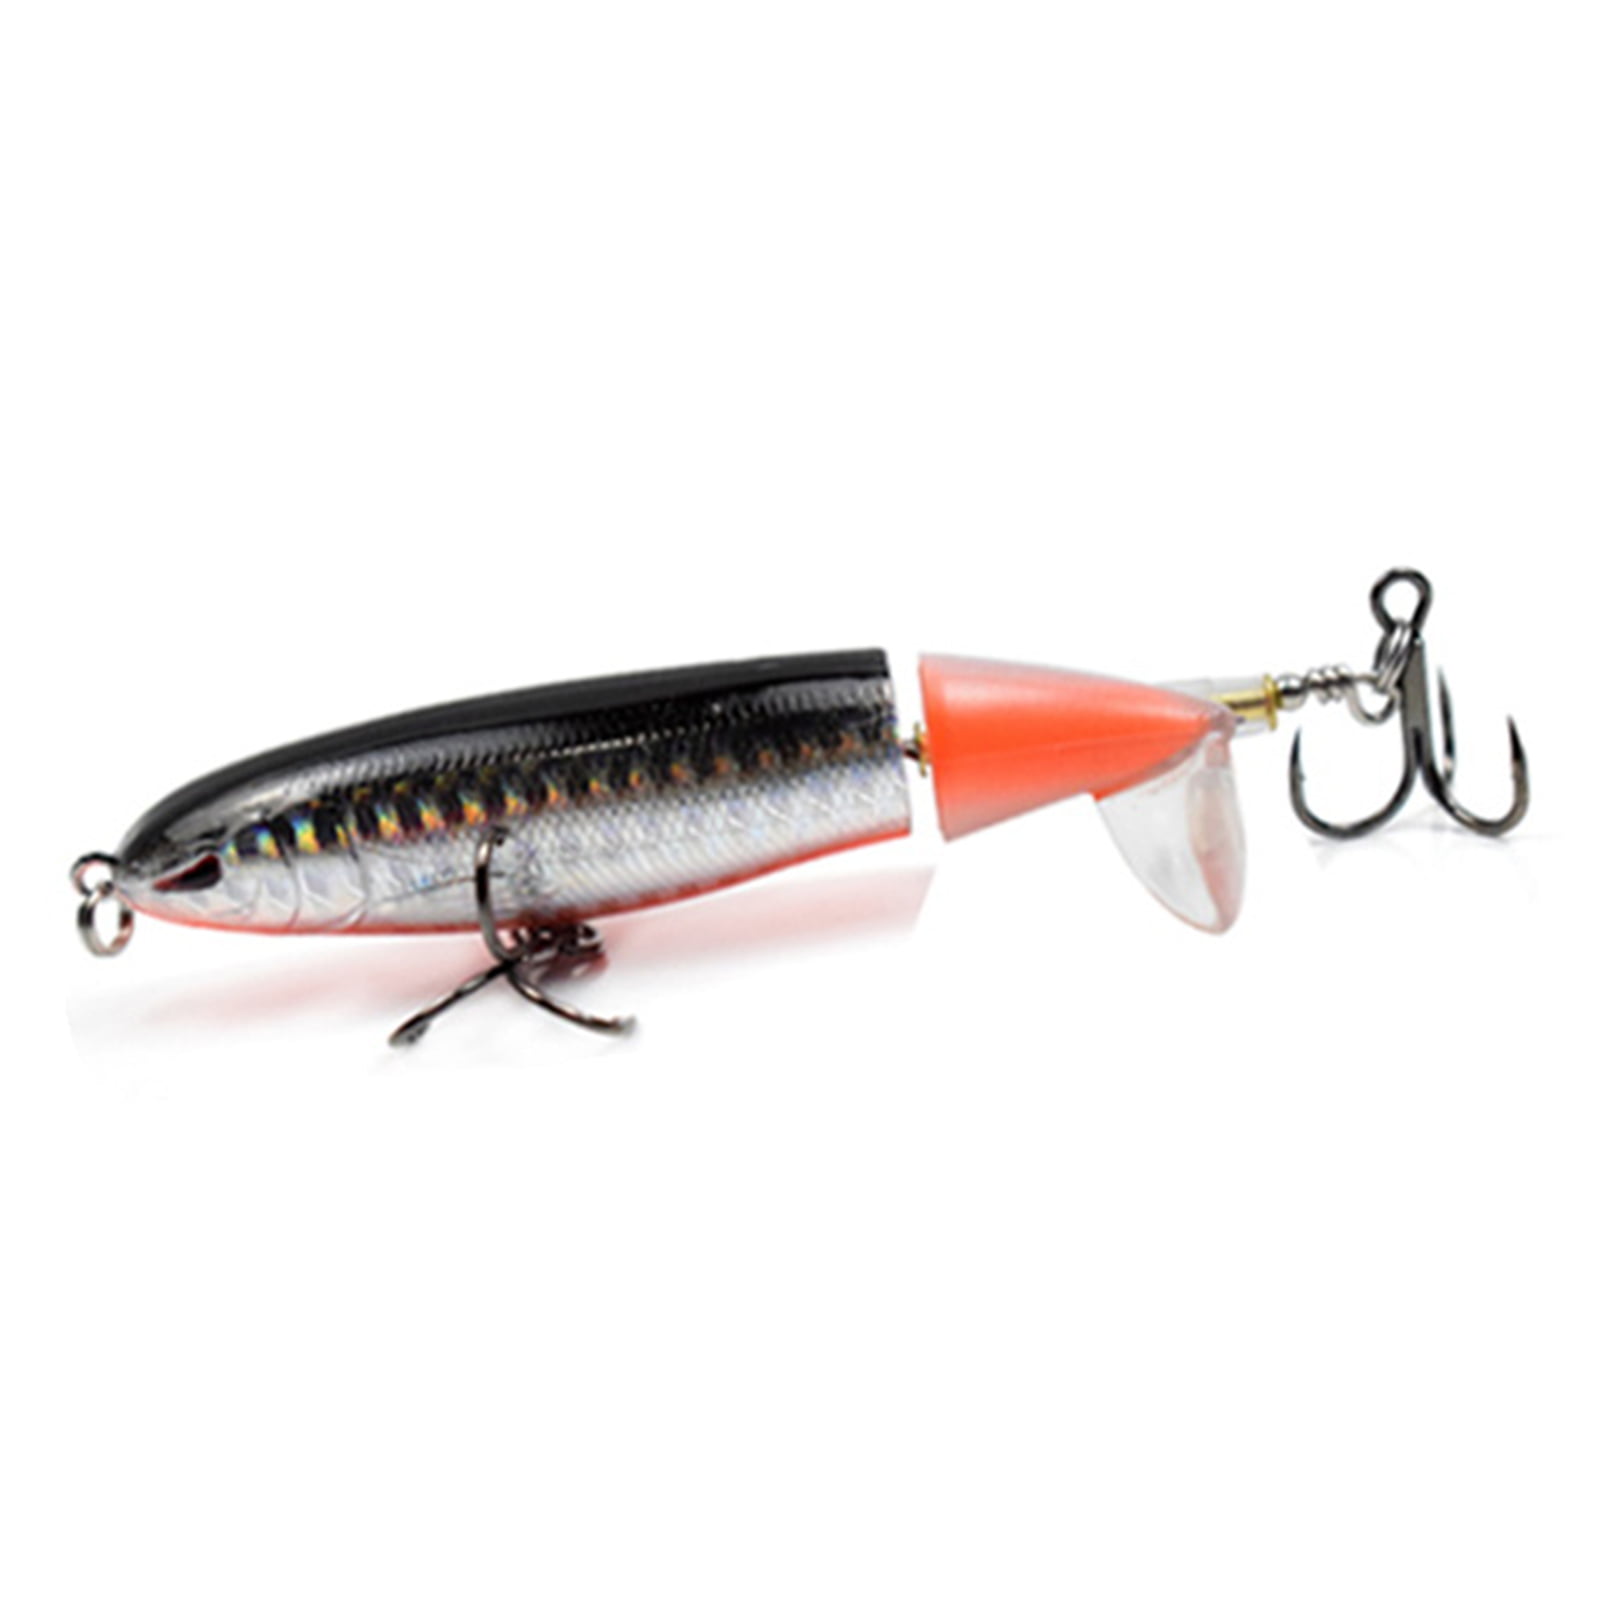 1Pc Fishing Lure Topwater Totating Tail Hooks Bass Accessory Outdoor Tool Kit 